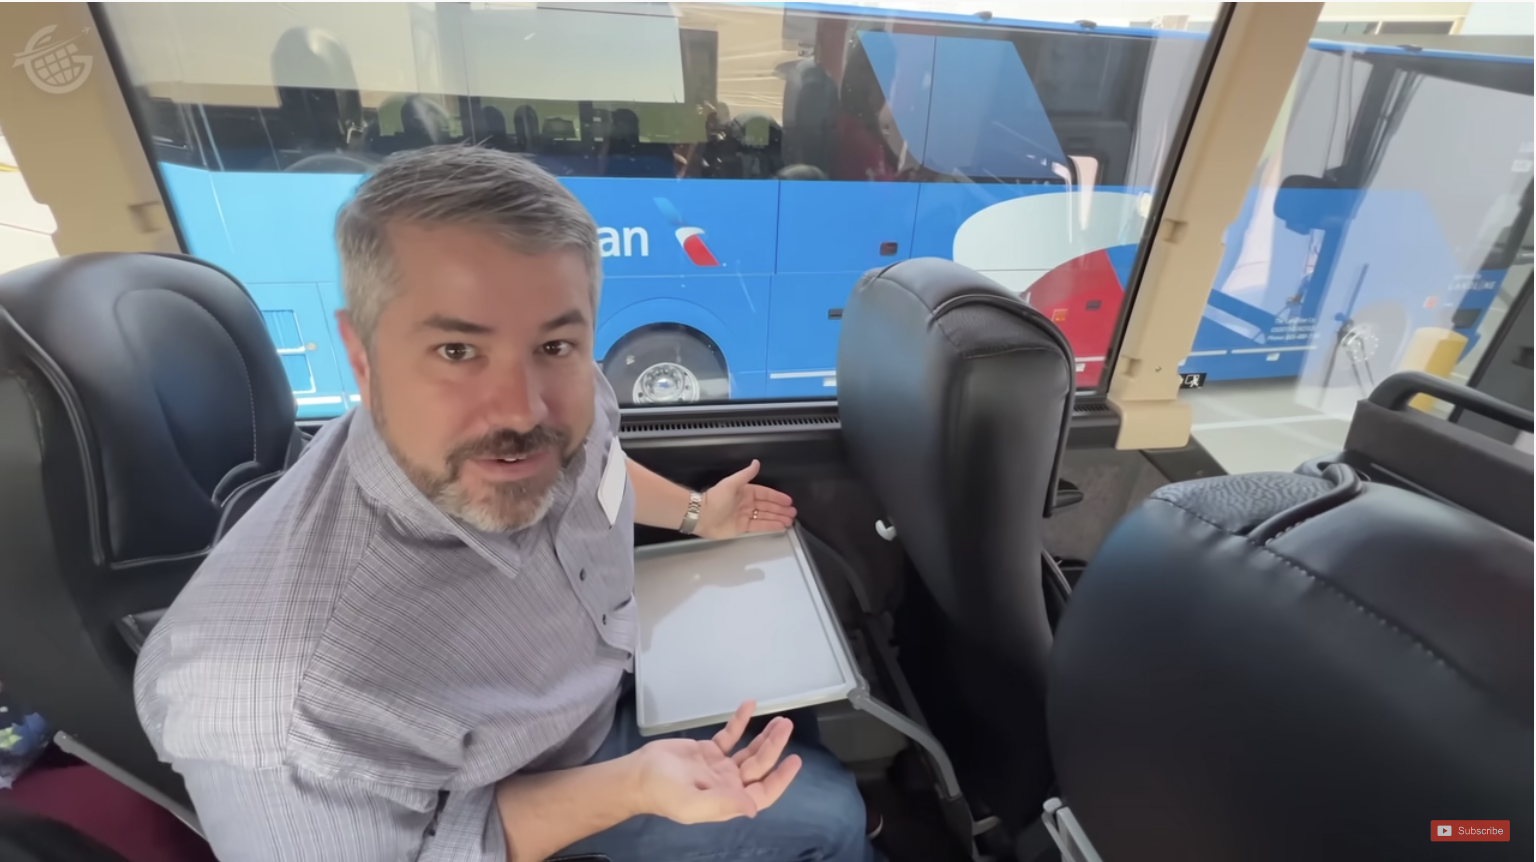 YouTuber Jeb Brooks reviews air travel by luxury bus